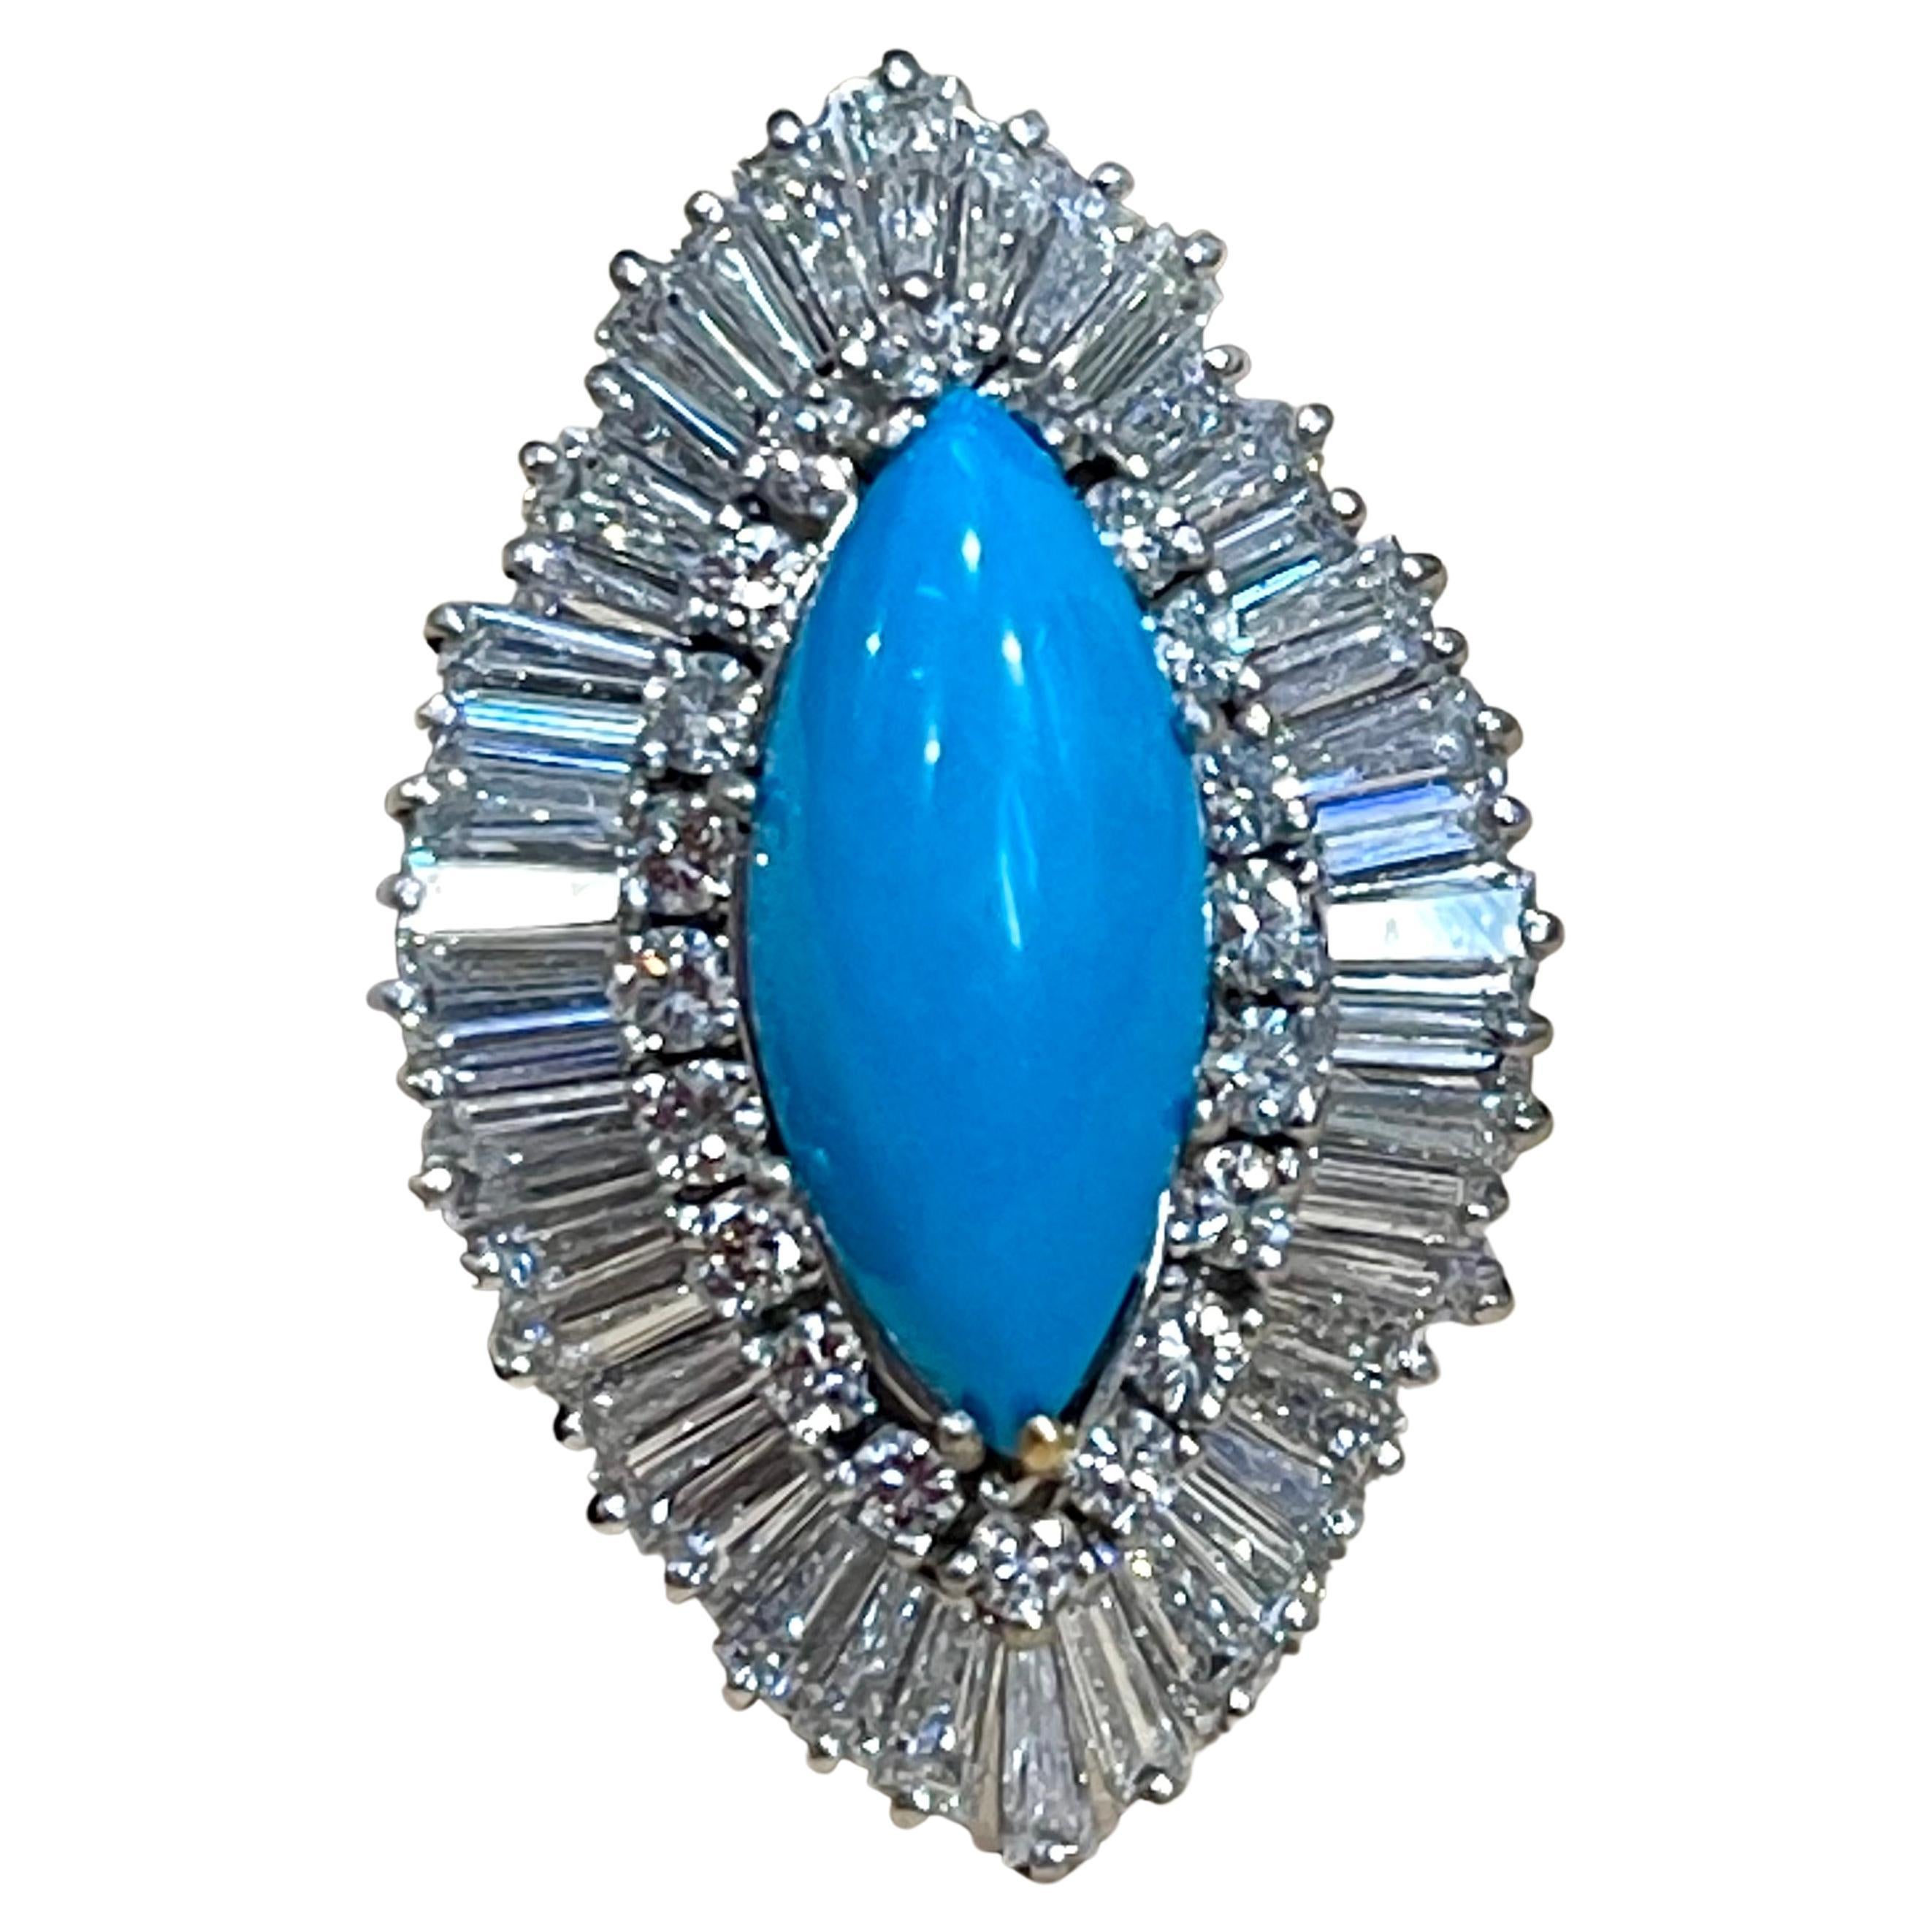 
Vintage Natural Marquise Sleeping Beauty  Turquoise Ring Set with Diamonds, Platinum 15 Gm
Approximately 8 Ct of Sleeping Beauty  Turquoise  and 8 Ct of Diamonds
Round and Baguettes diamonds 
Platinum 15 Grams 
 Diamonds: approximate 8 carat , VS